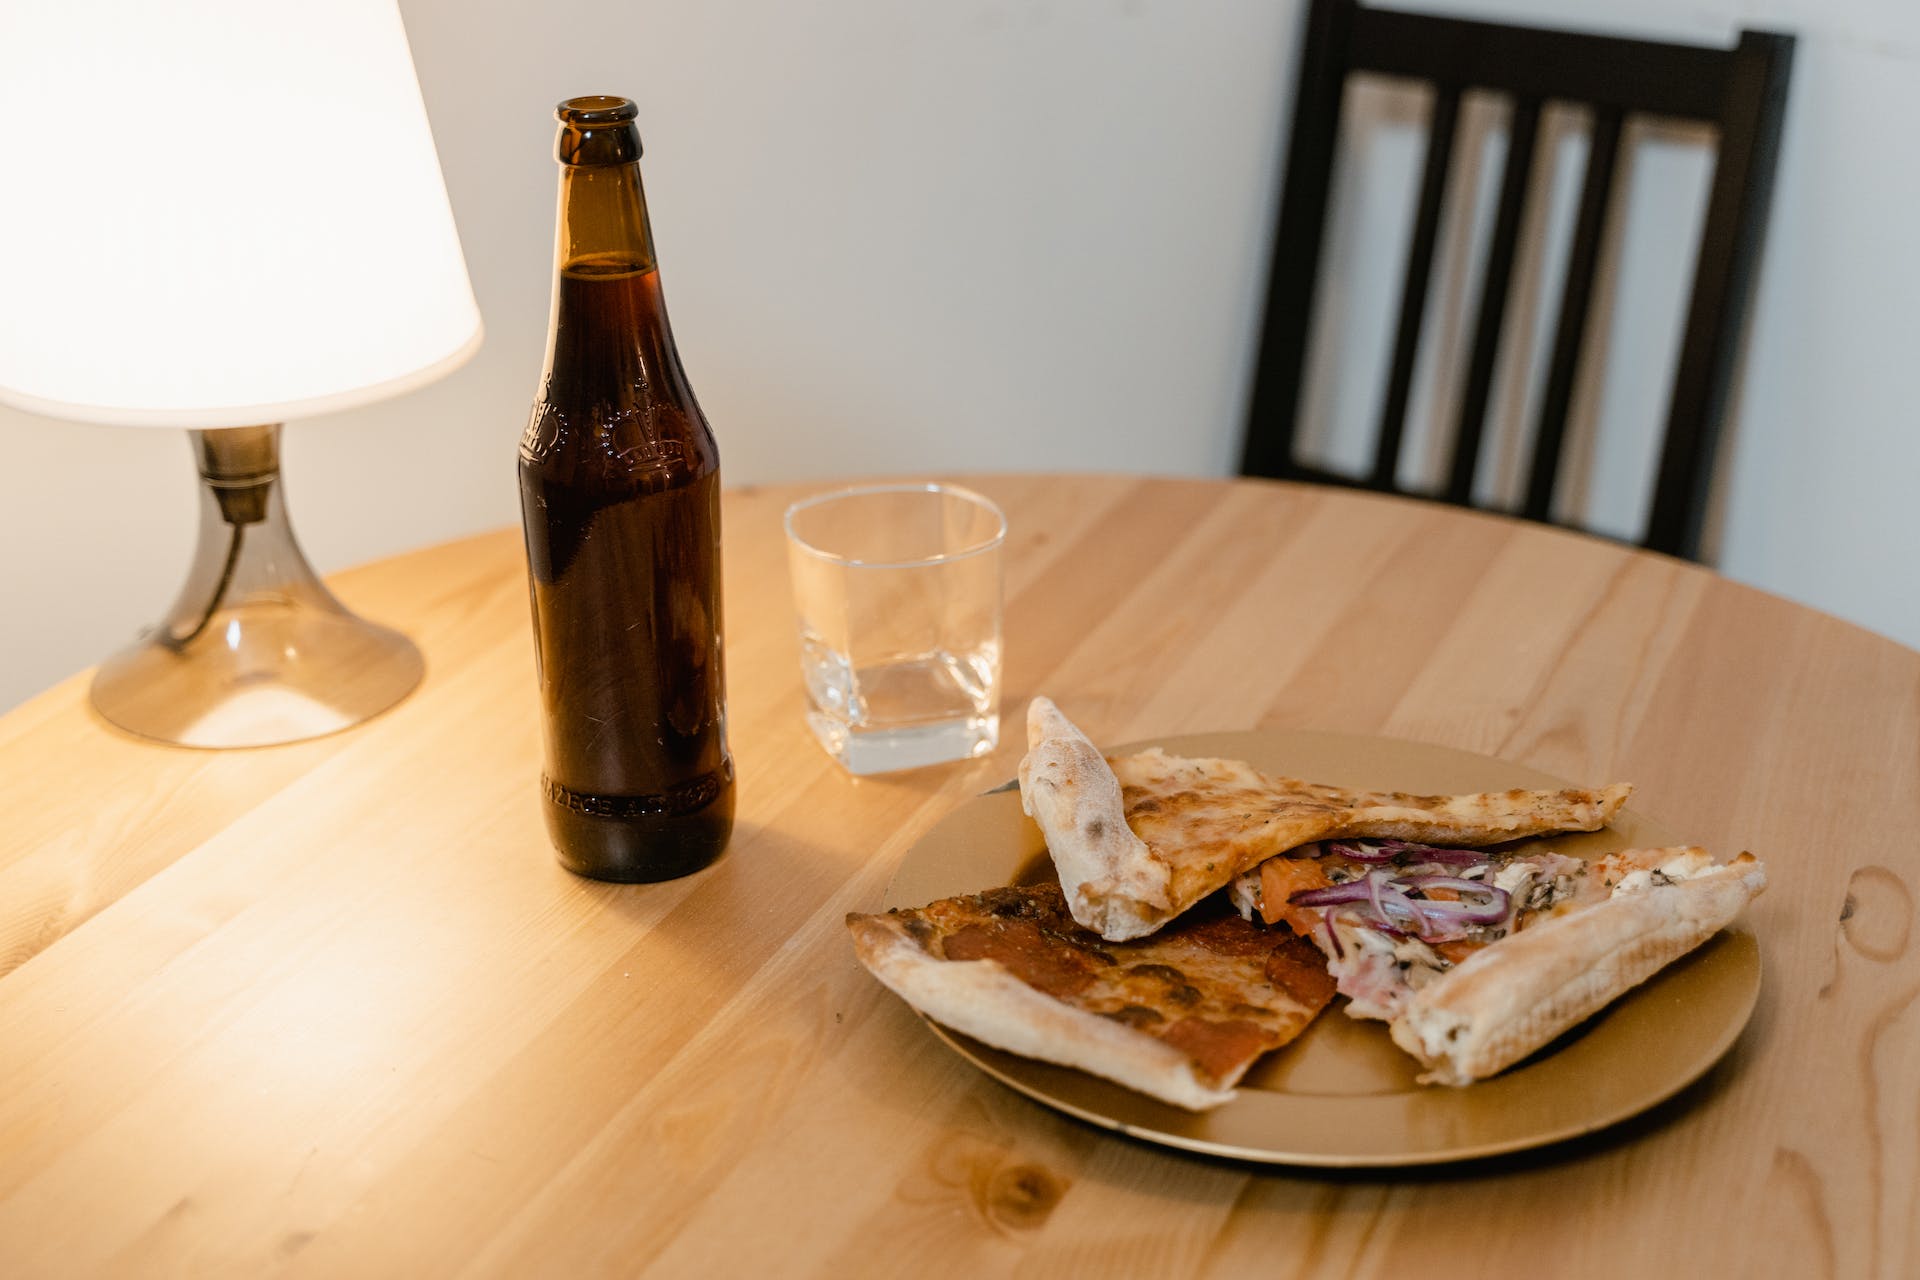 Pizza and beer on table | Source: Pexels